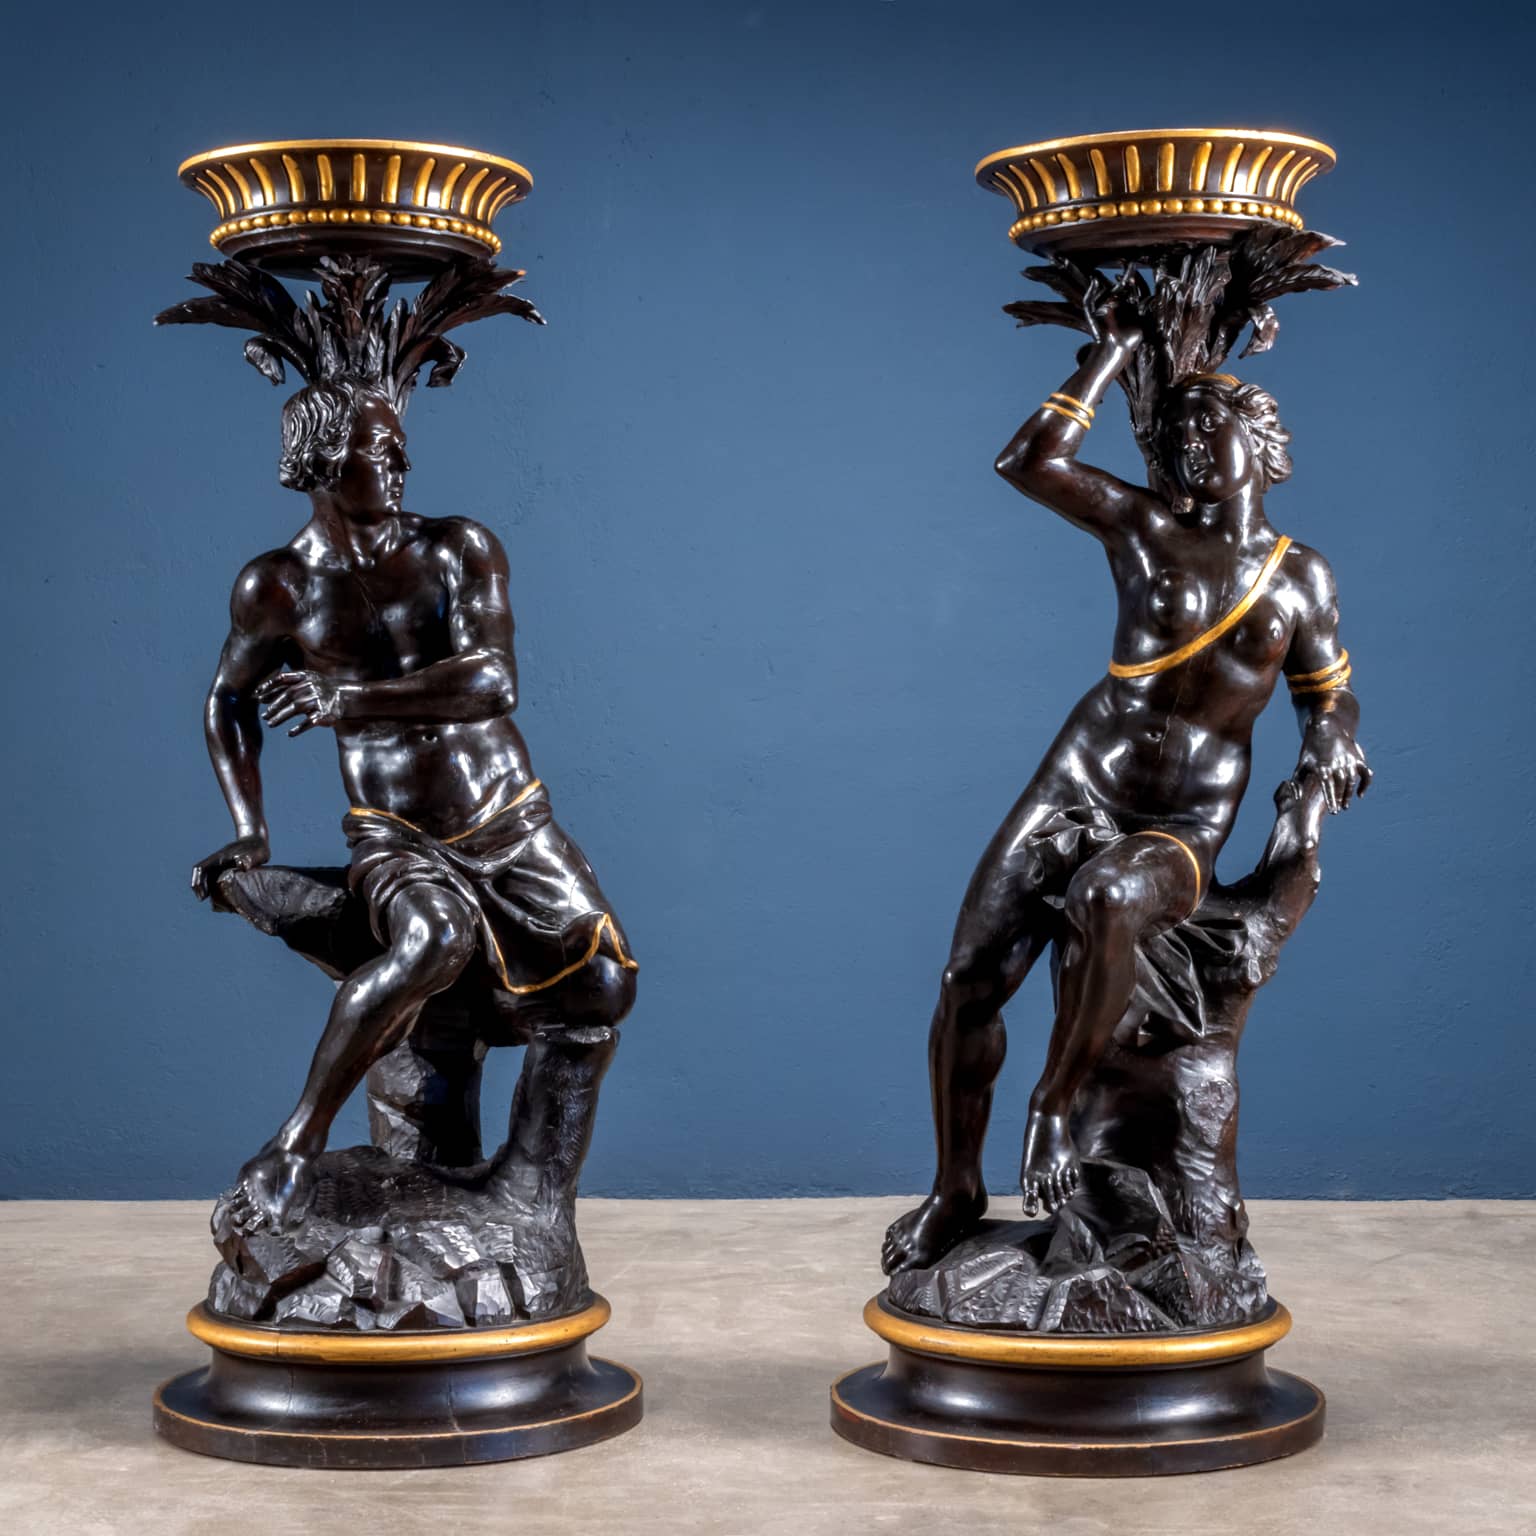 Pair of vase-holding figures, by the Groppelli Brothers, early 18th century